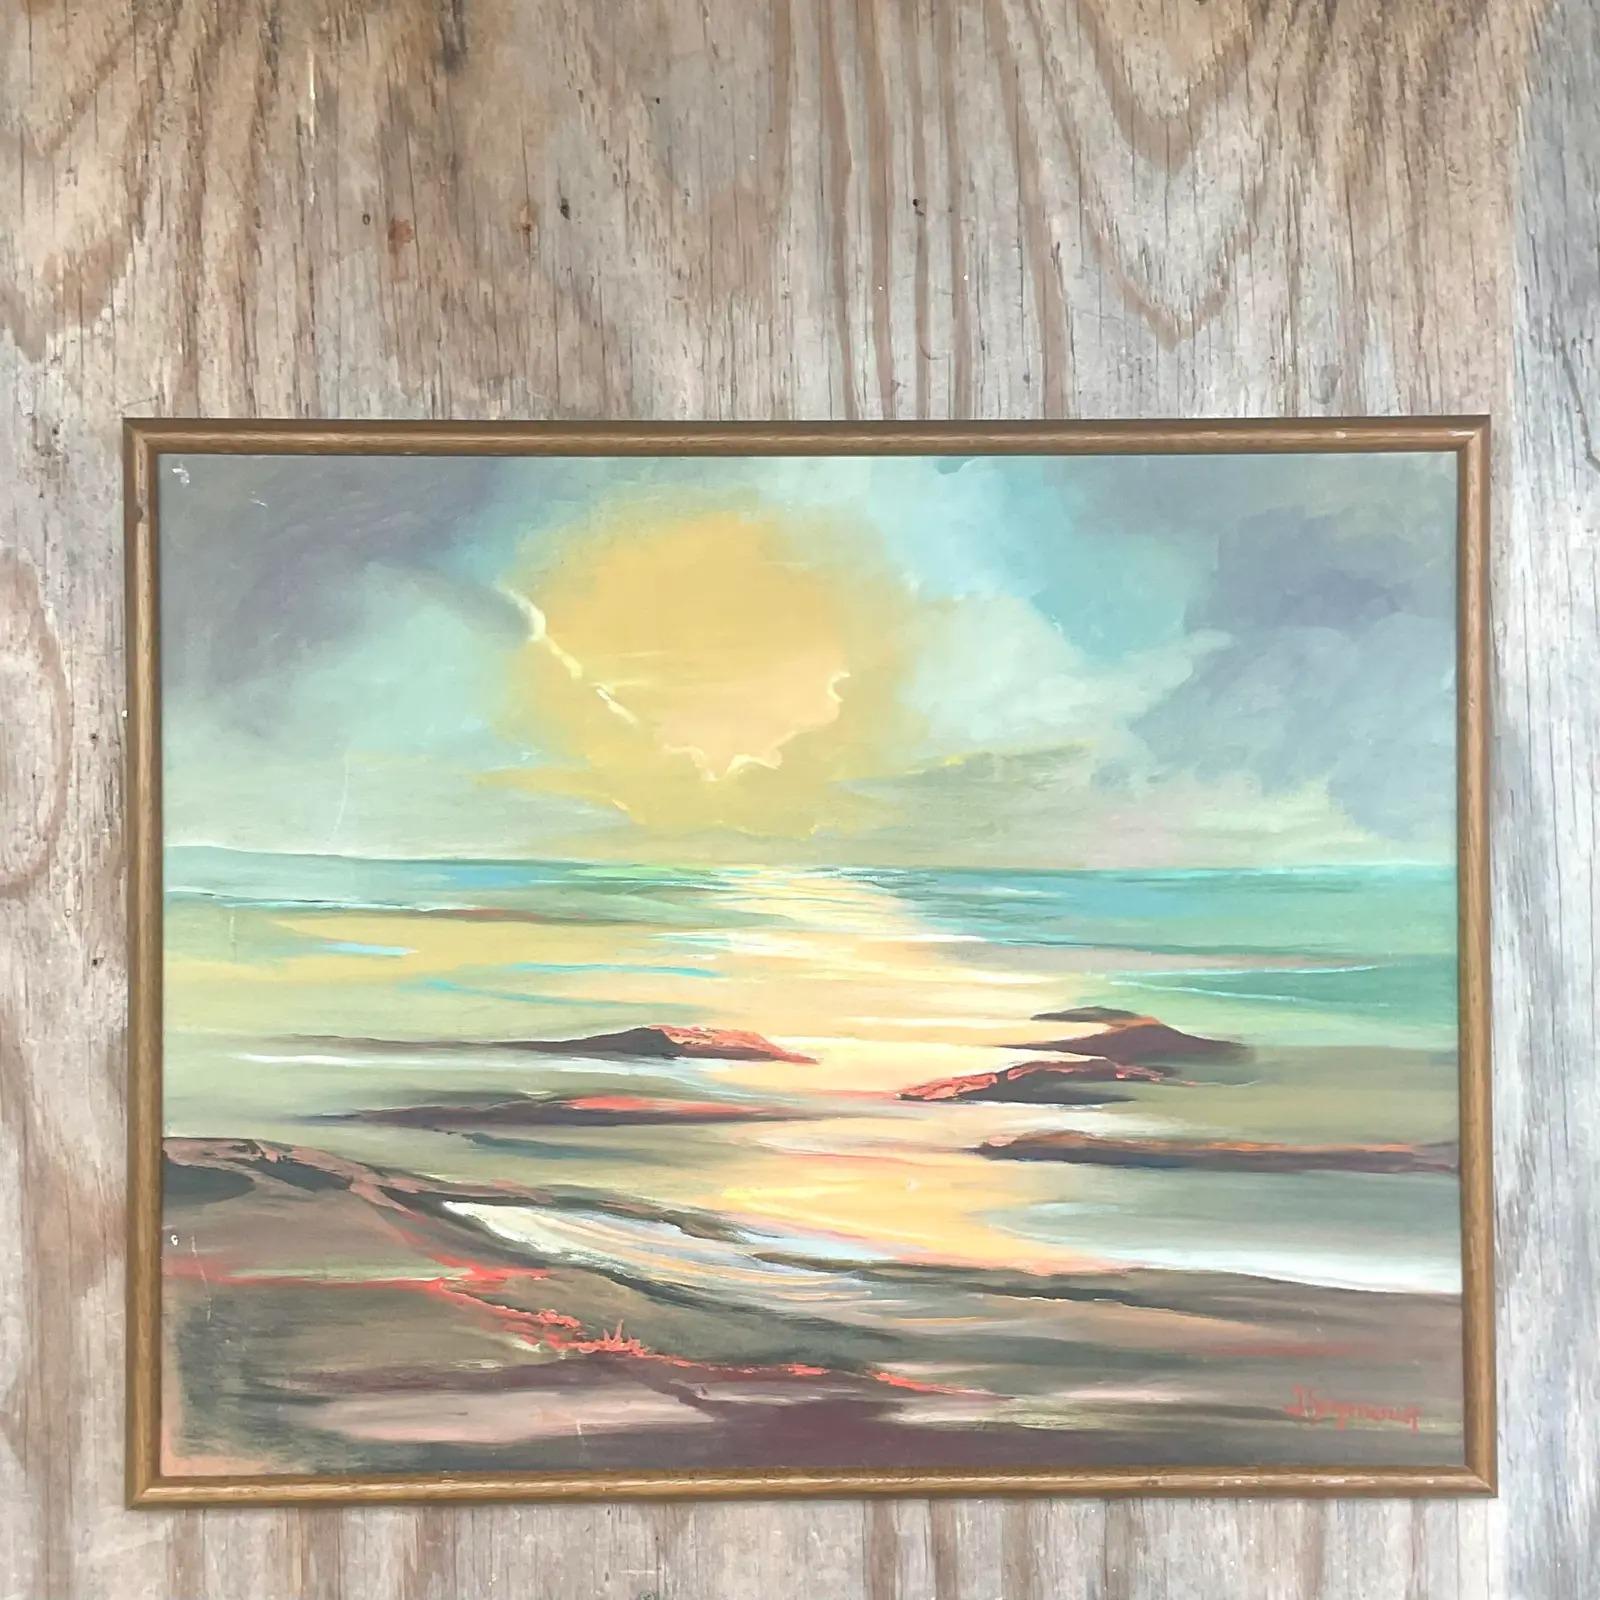 A stunning vintage original oil painting on canvas. A beautiful sea scape at sunset. A brilliant color composition. Signed by the artist. Acquired from a Palm Beach estate.